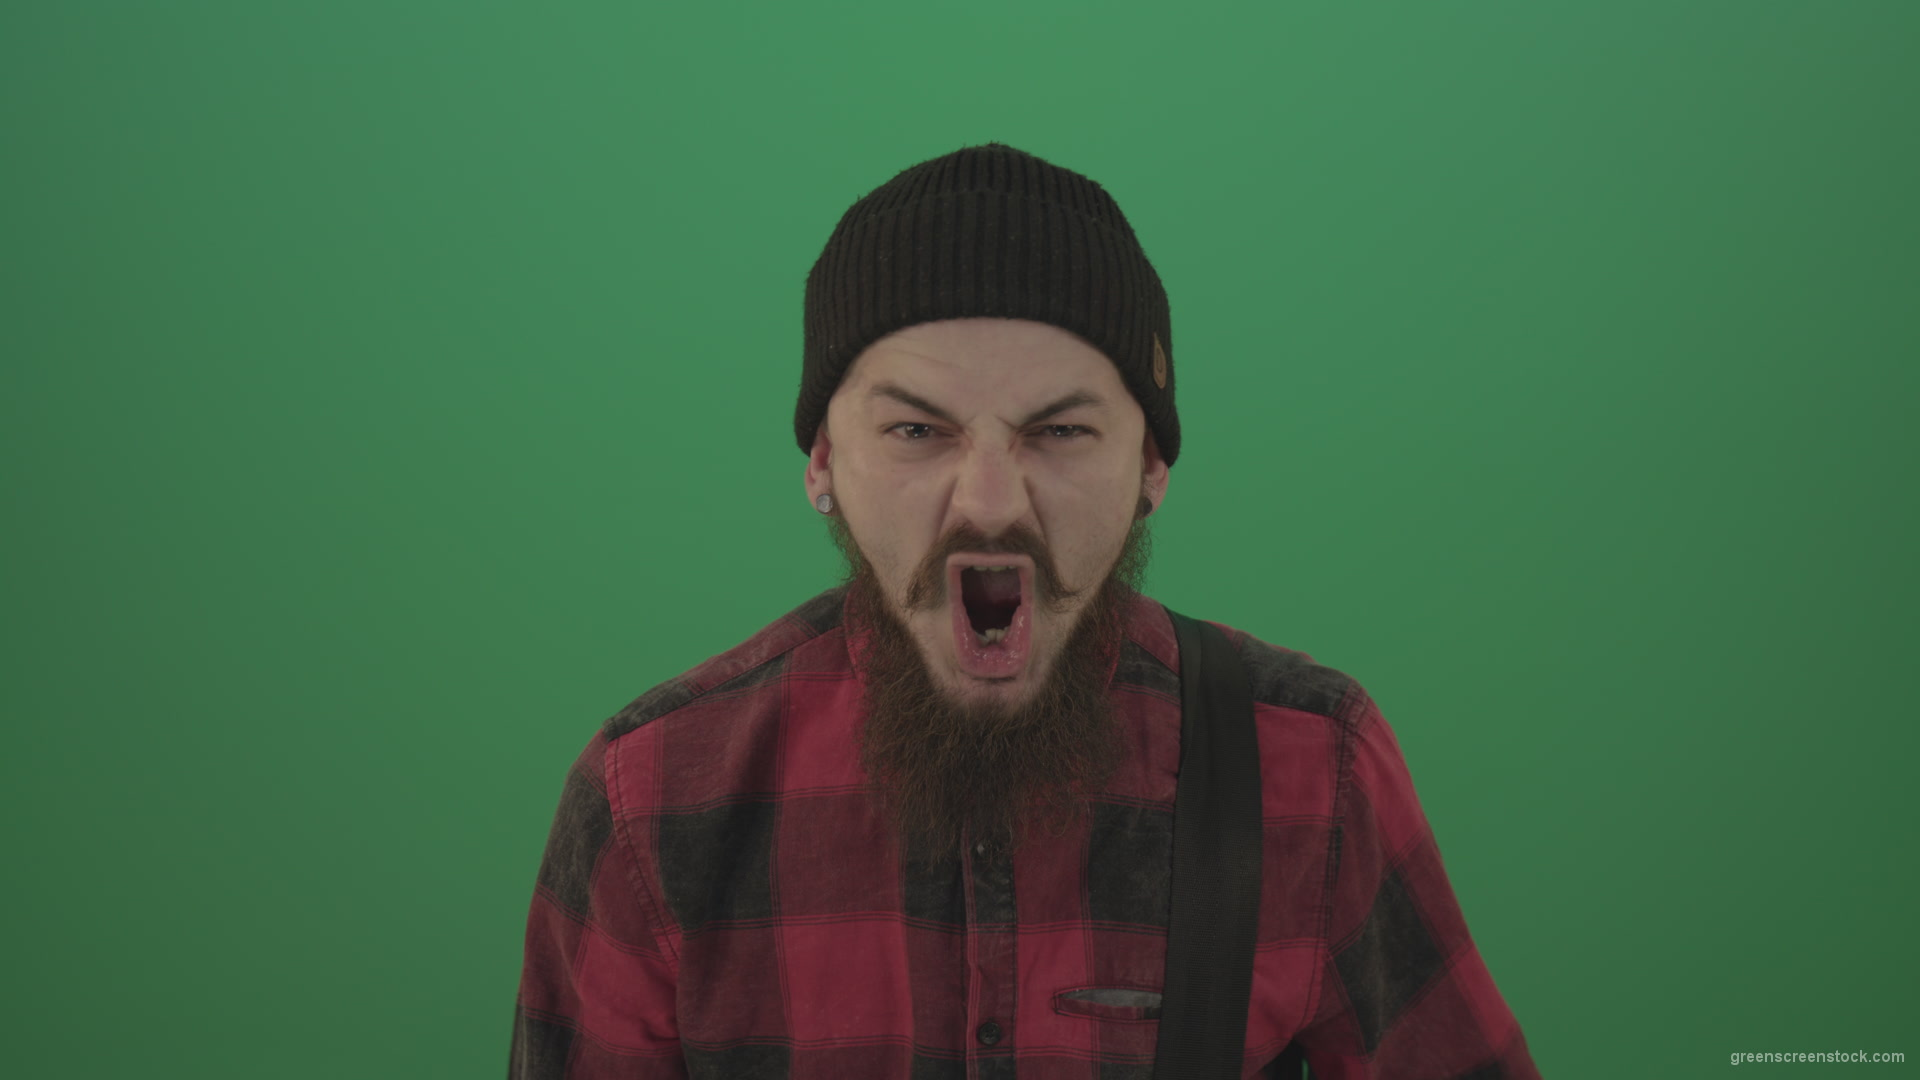 Punk-rocker-man-with-beard-and-red-shirt-screaming-feels-pain-isolated-on-green-screen-background_005 Green Screen Stock